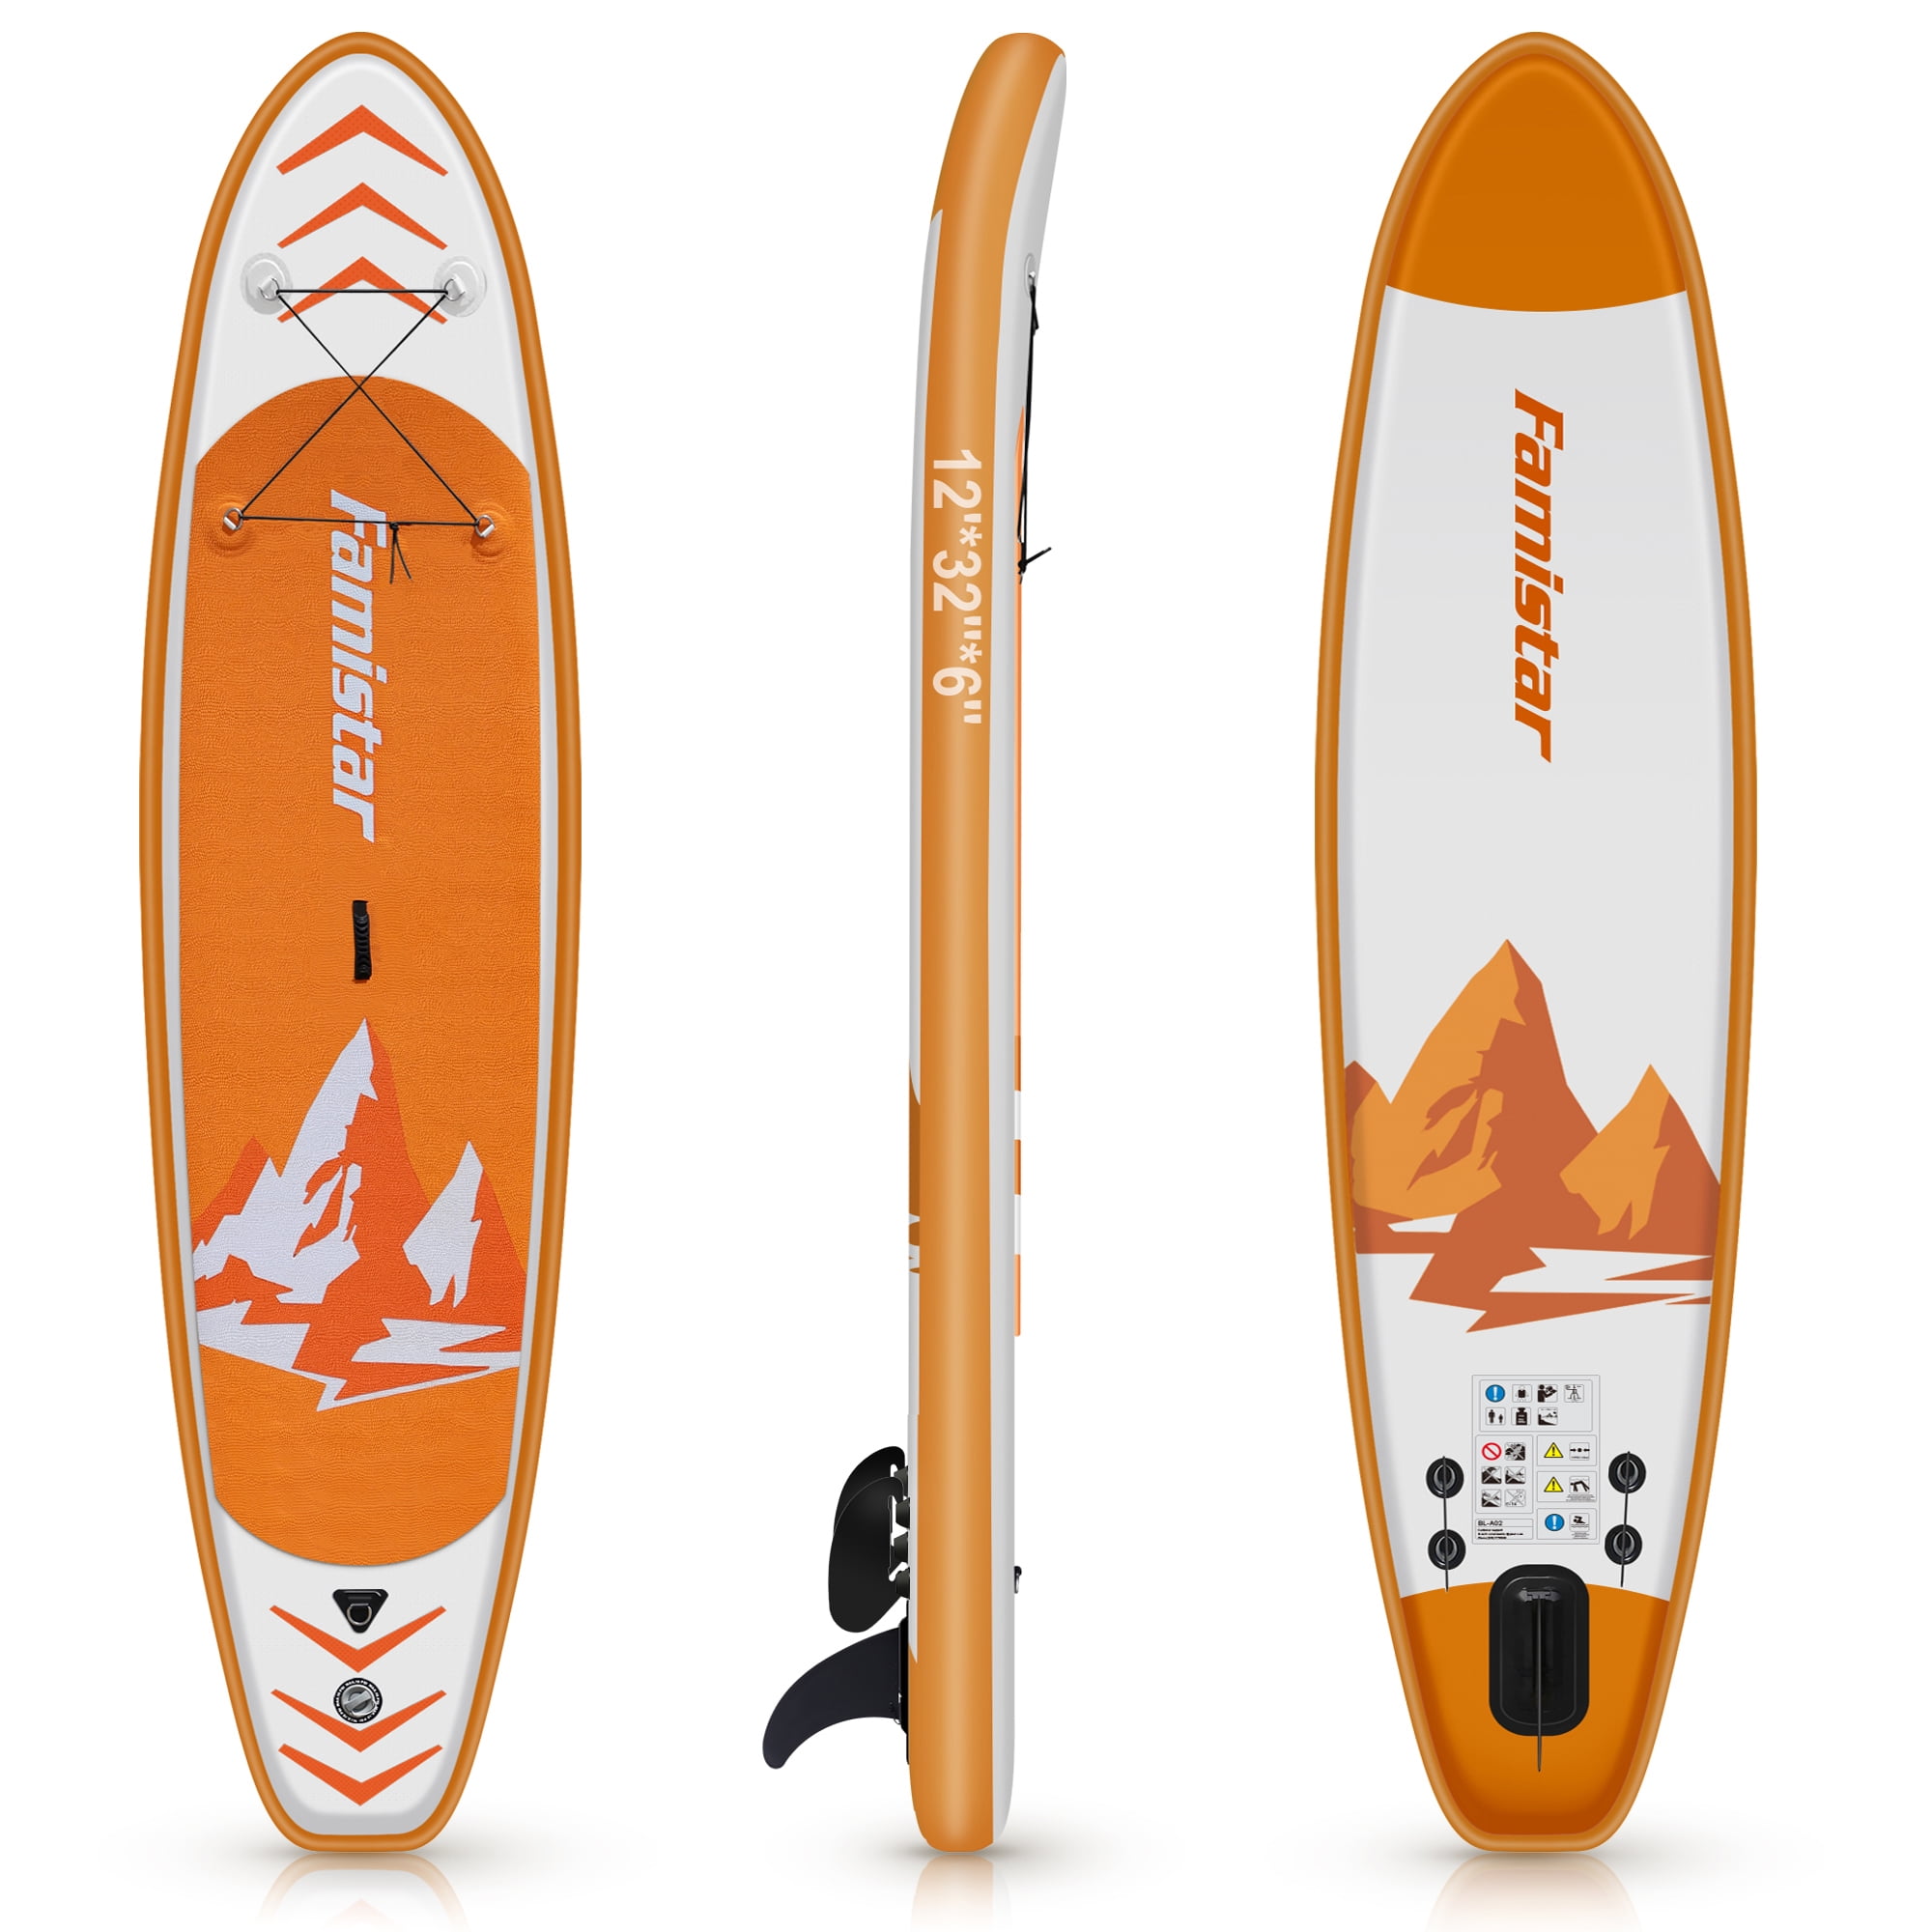 Famistar Inflatable Stand Up Paddle Board (12 Feet Long) w/ Premium SUP ...